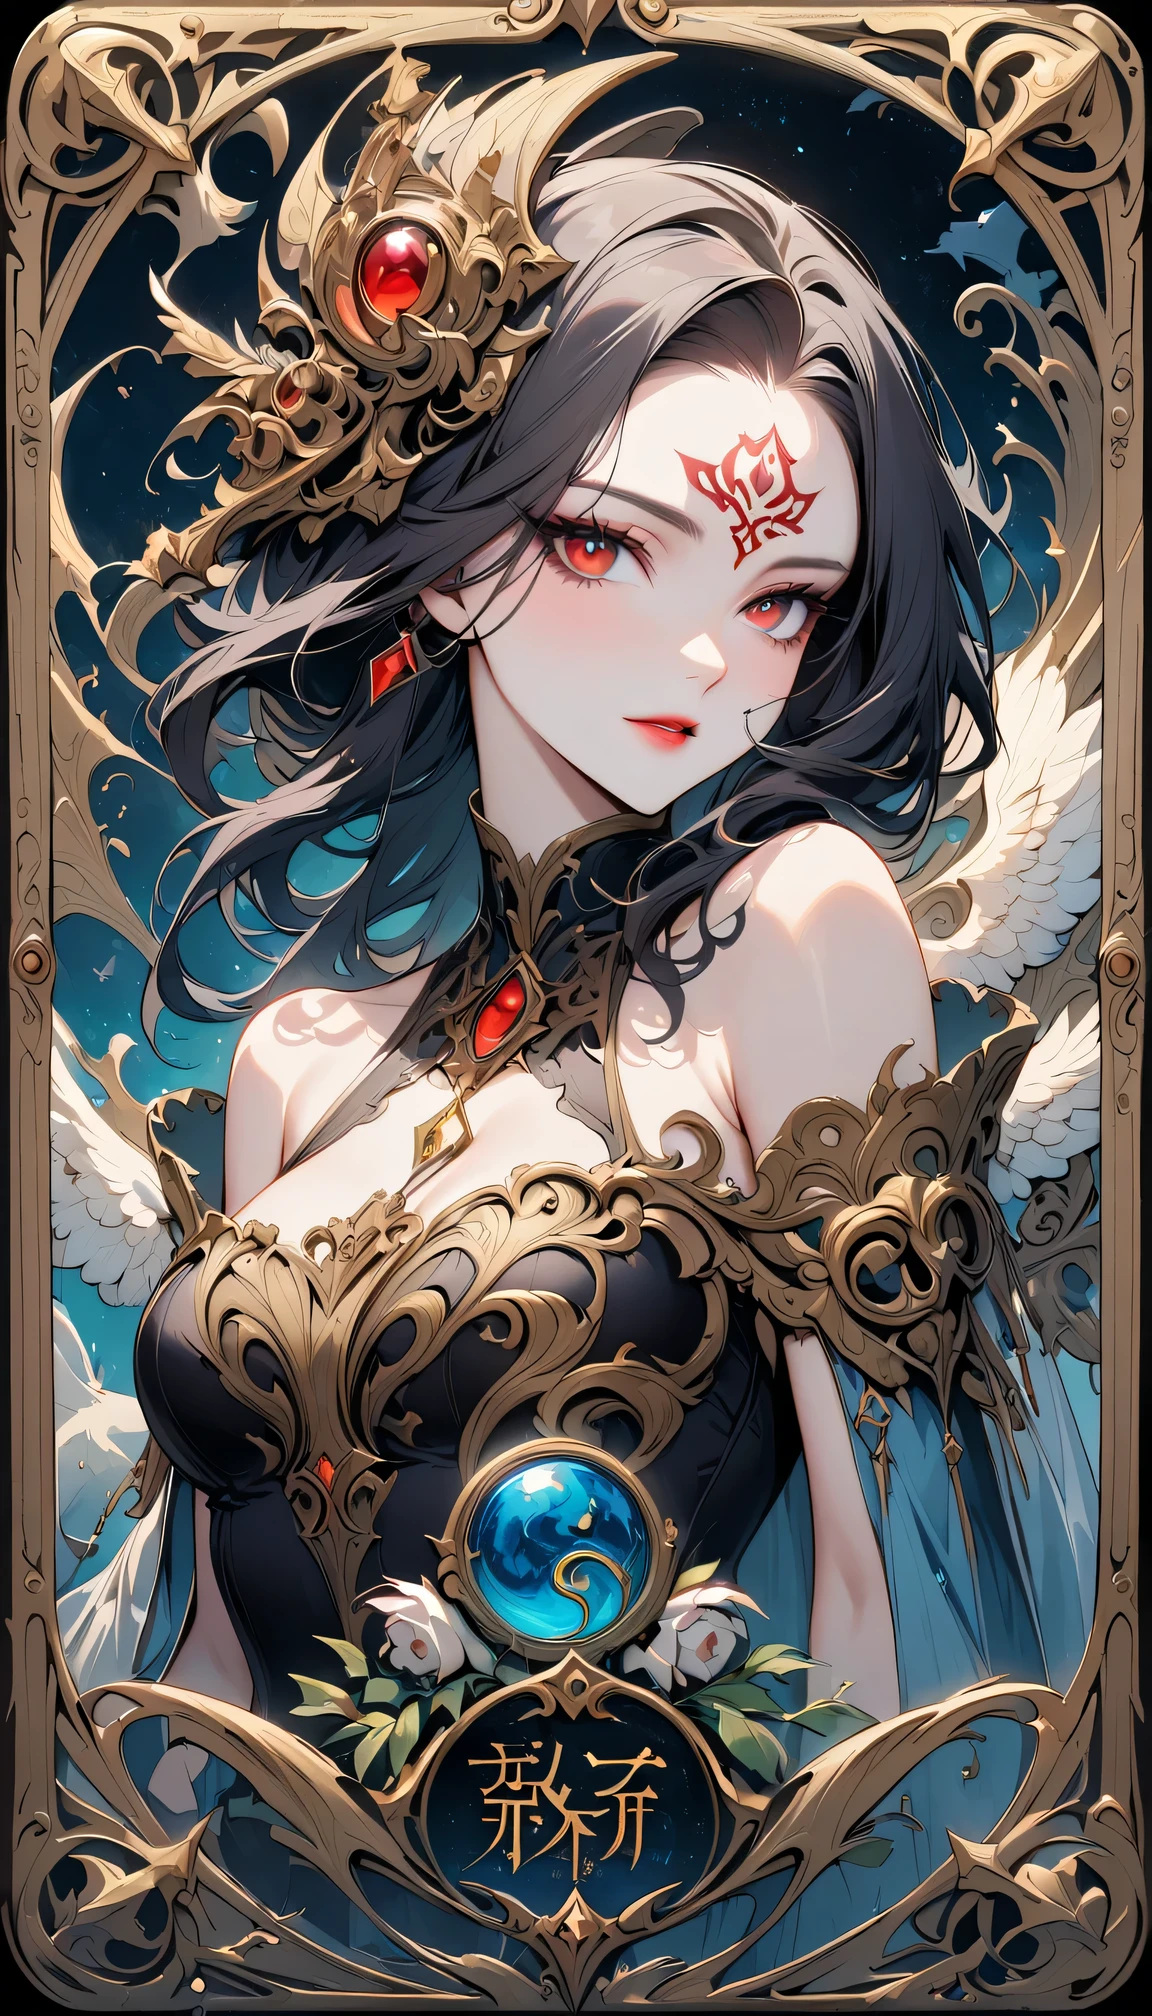 A beautiful woman tarot card, (a red eye:1.2),face tattoo(Meaningful Chinese character writing:1.1), combine elements perfectly.